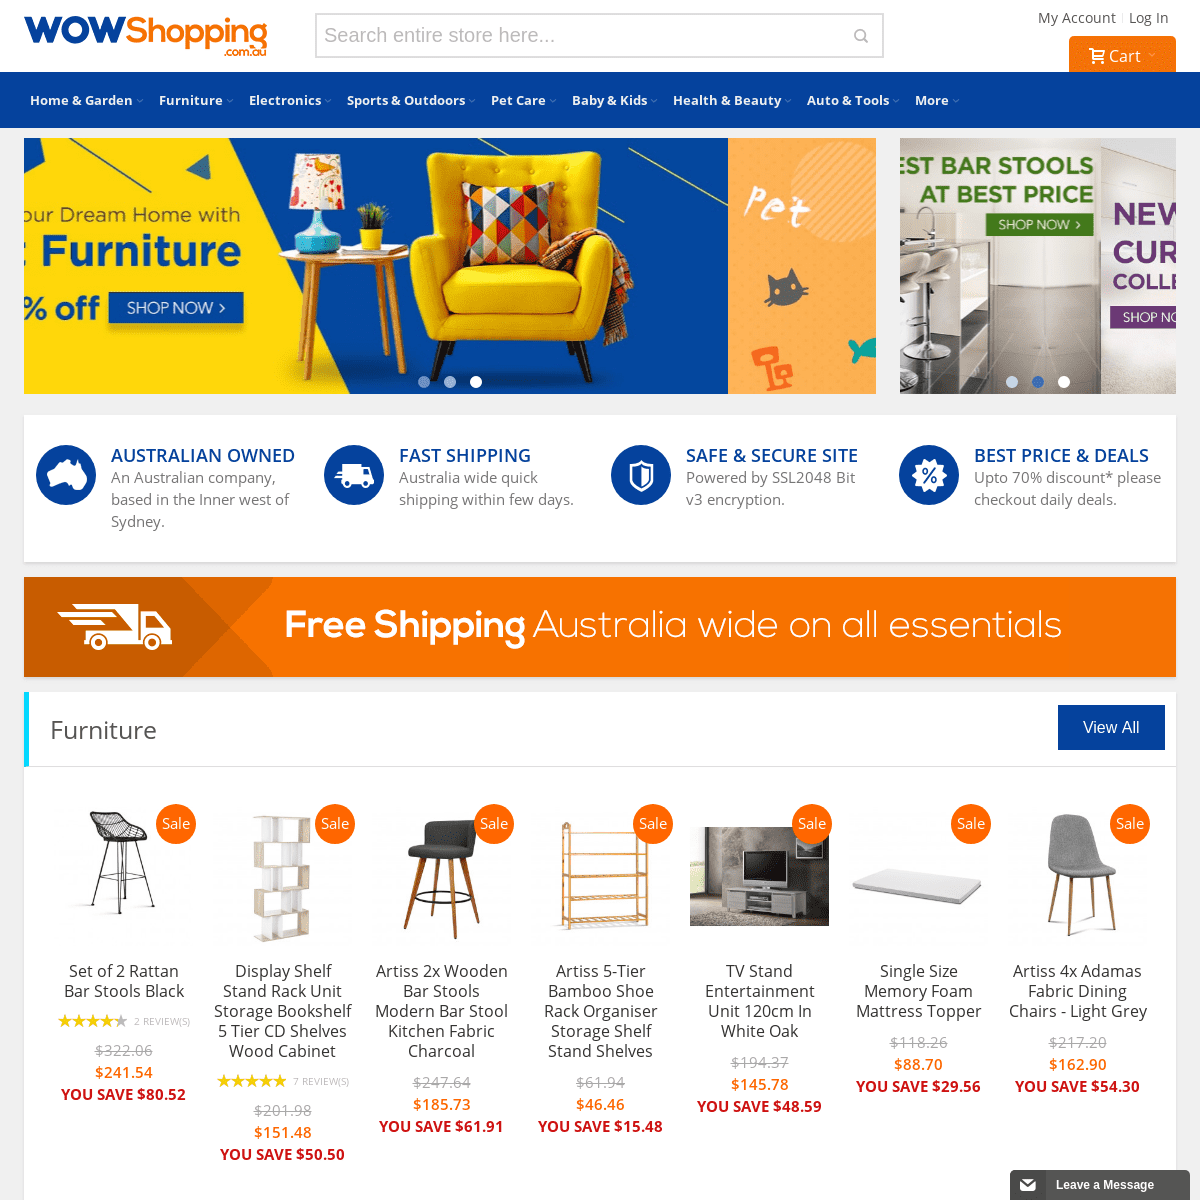 A complete backup of wowshopping.com.au